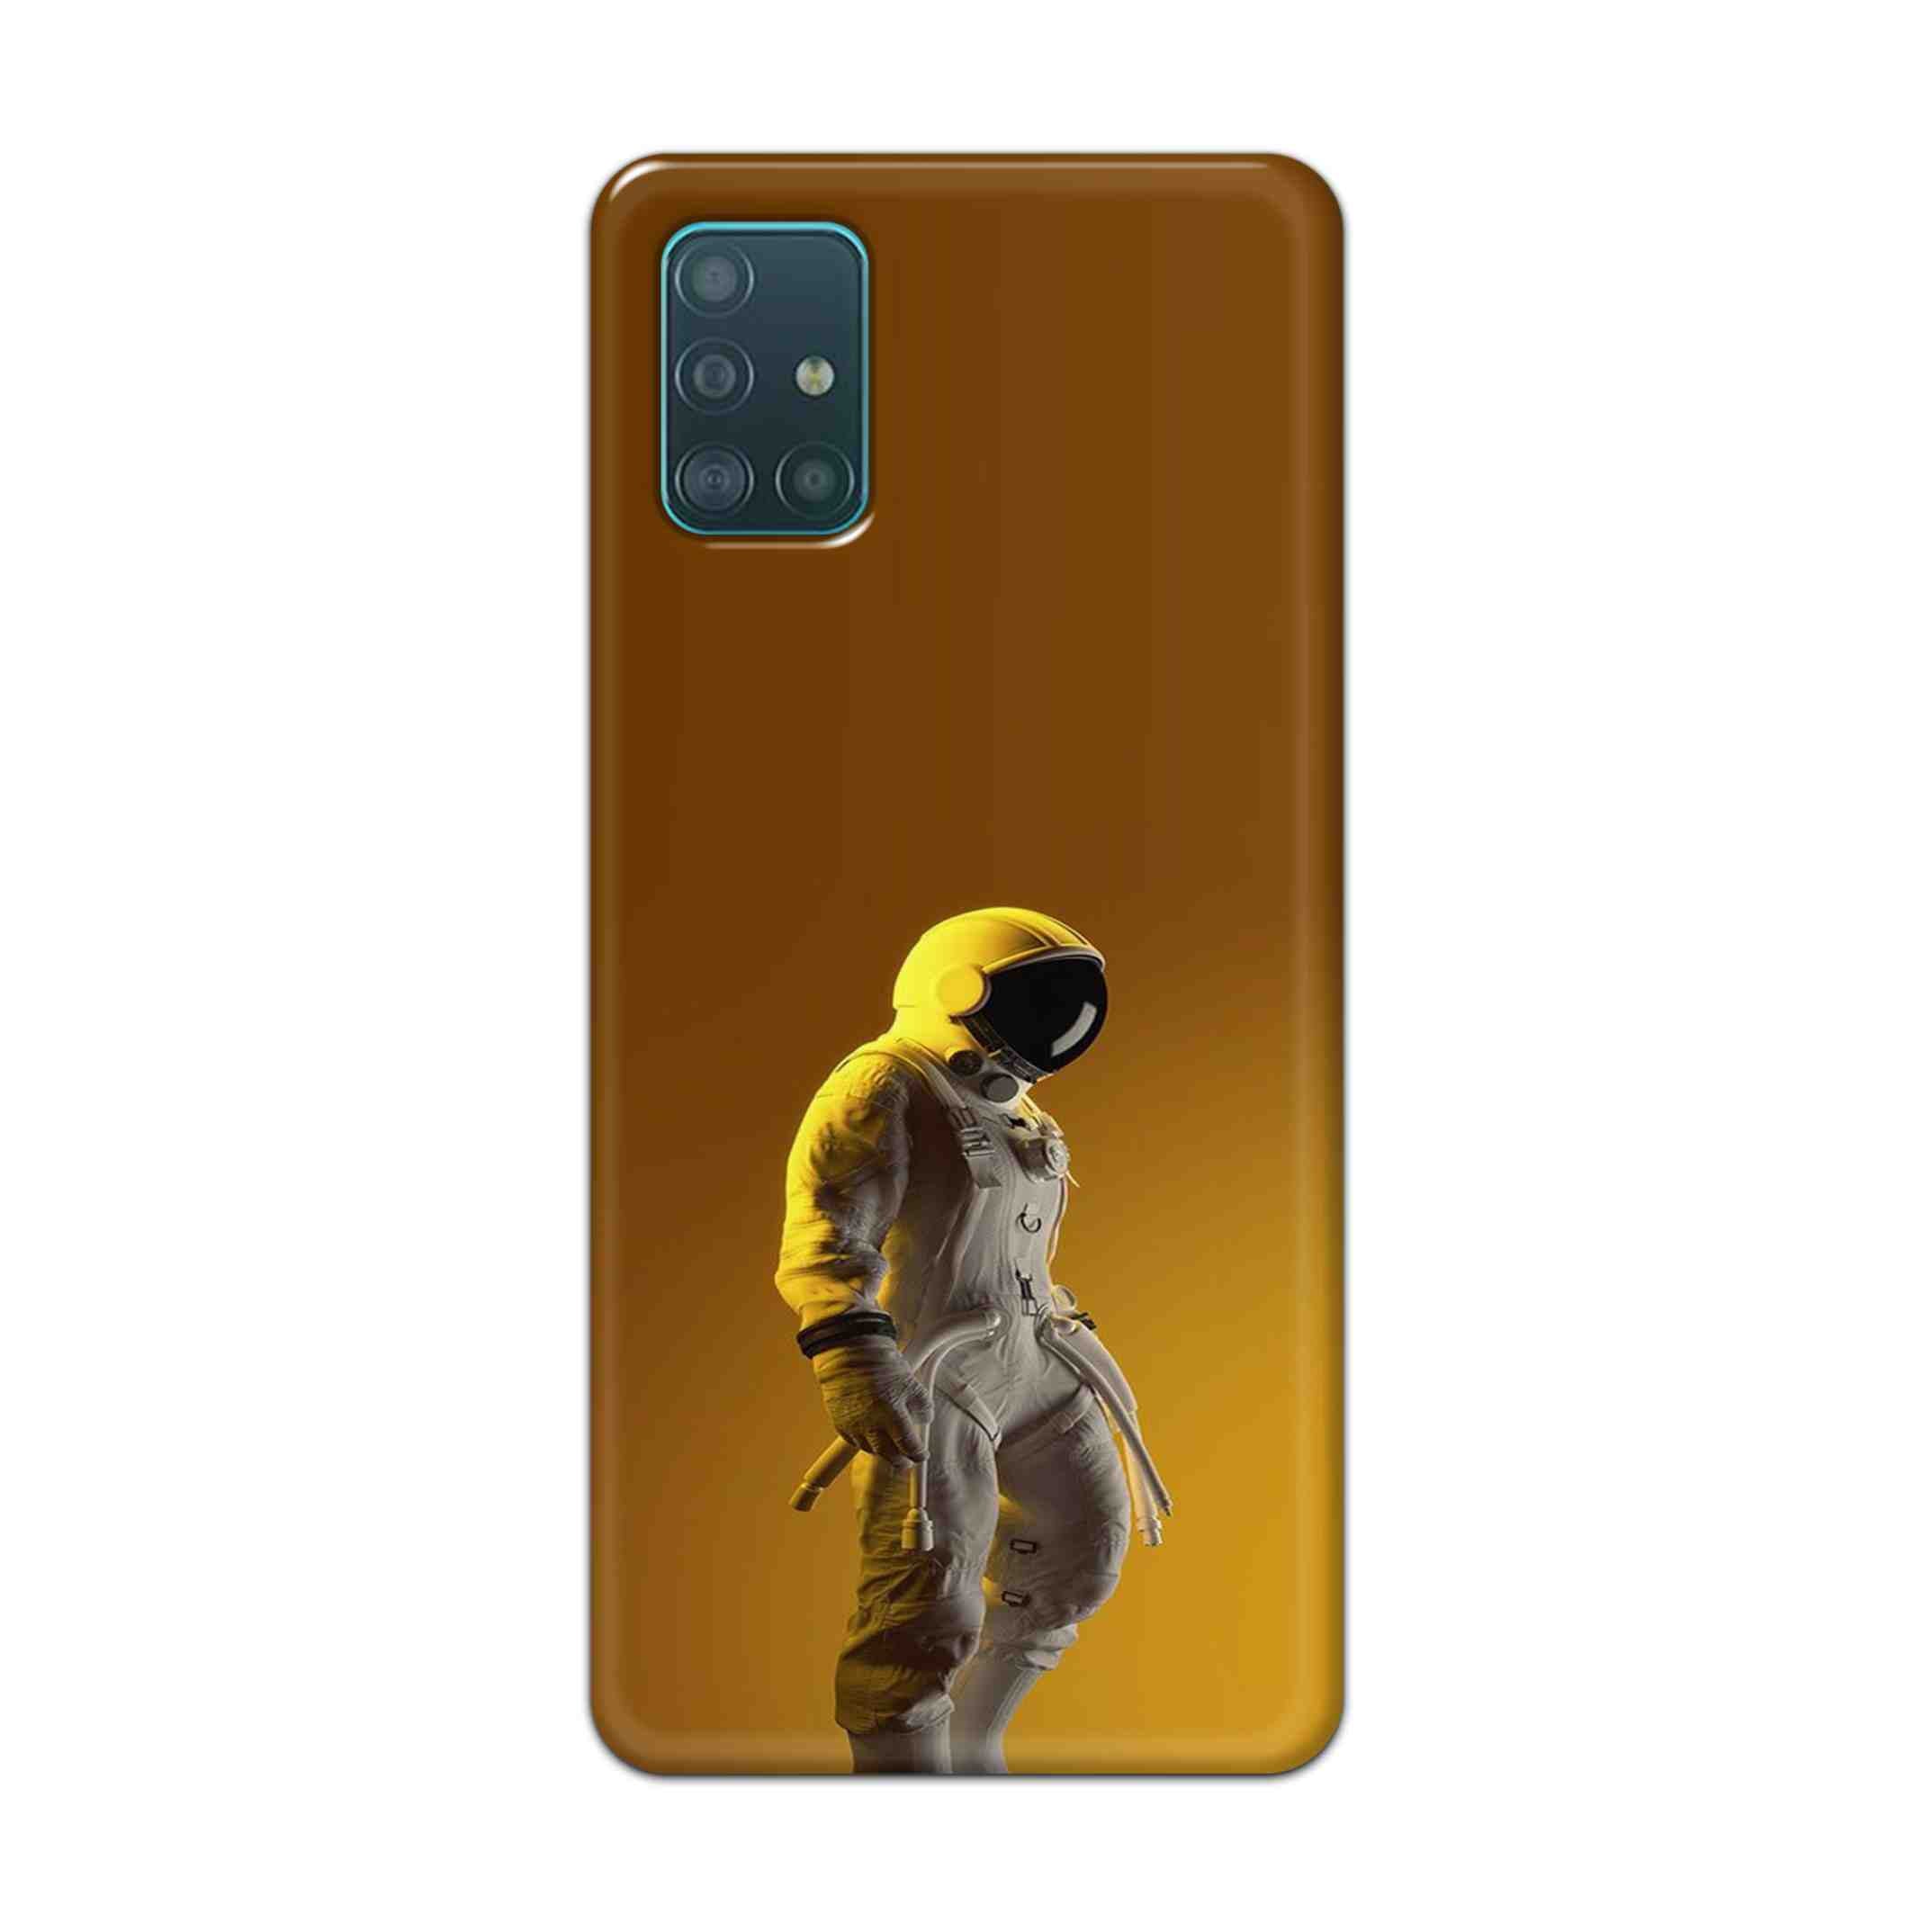 Buy Yellow Astronaut Hard Back Mobile Phone Case Cover For Samsung A51 Online